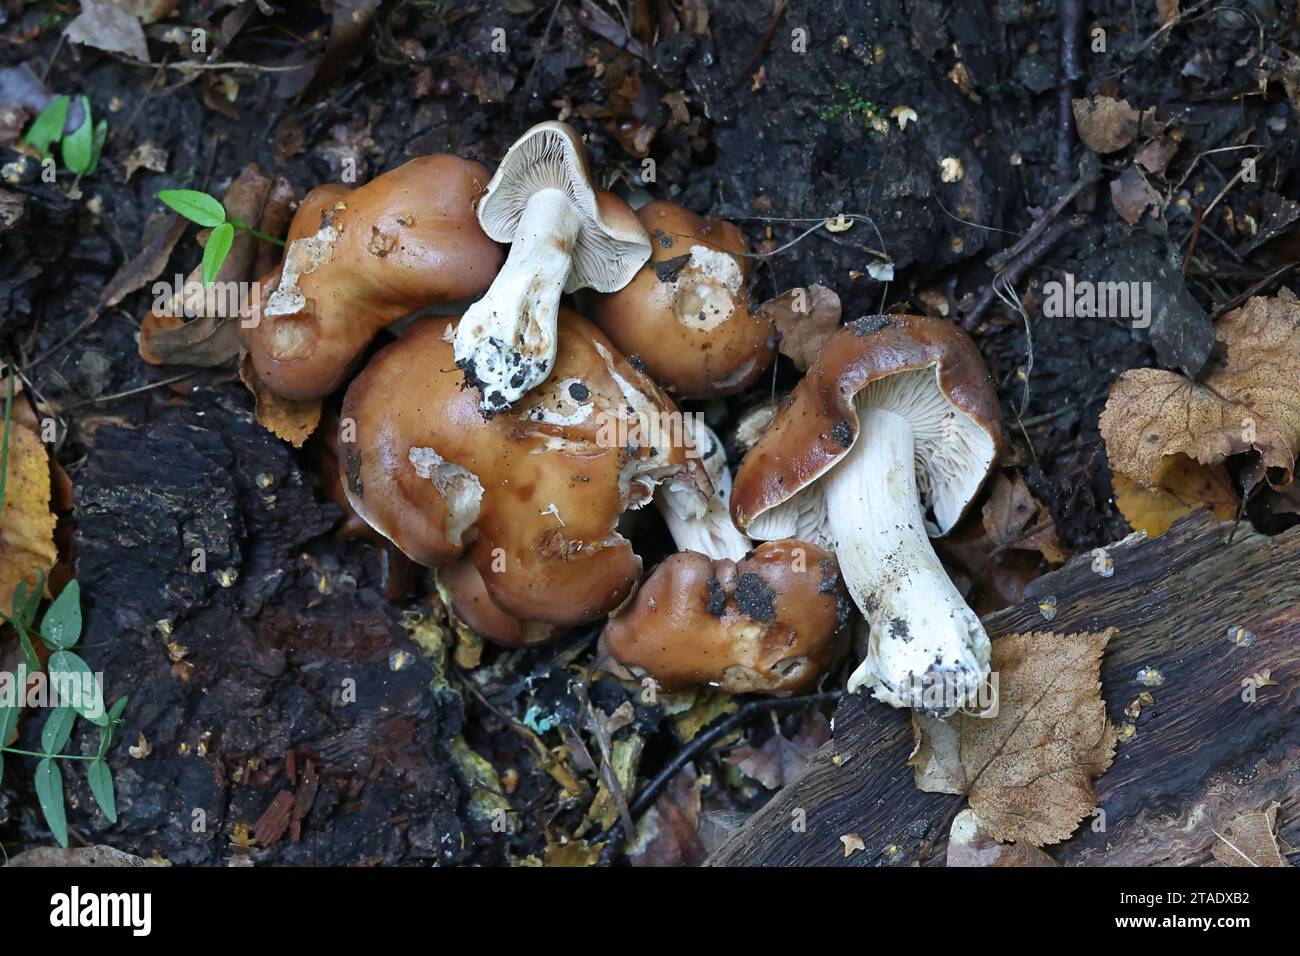 Hebeloma theobrominum, a poison pie mushroom from Finland, no common English name Stock Photo